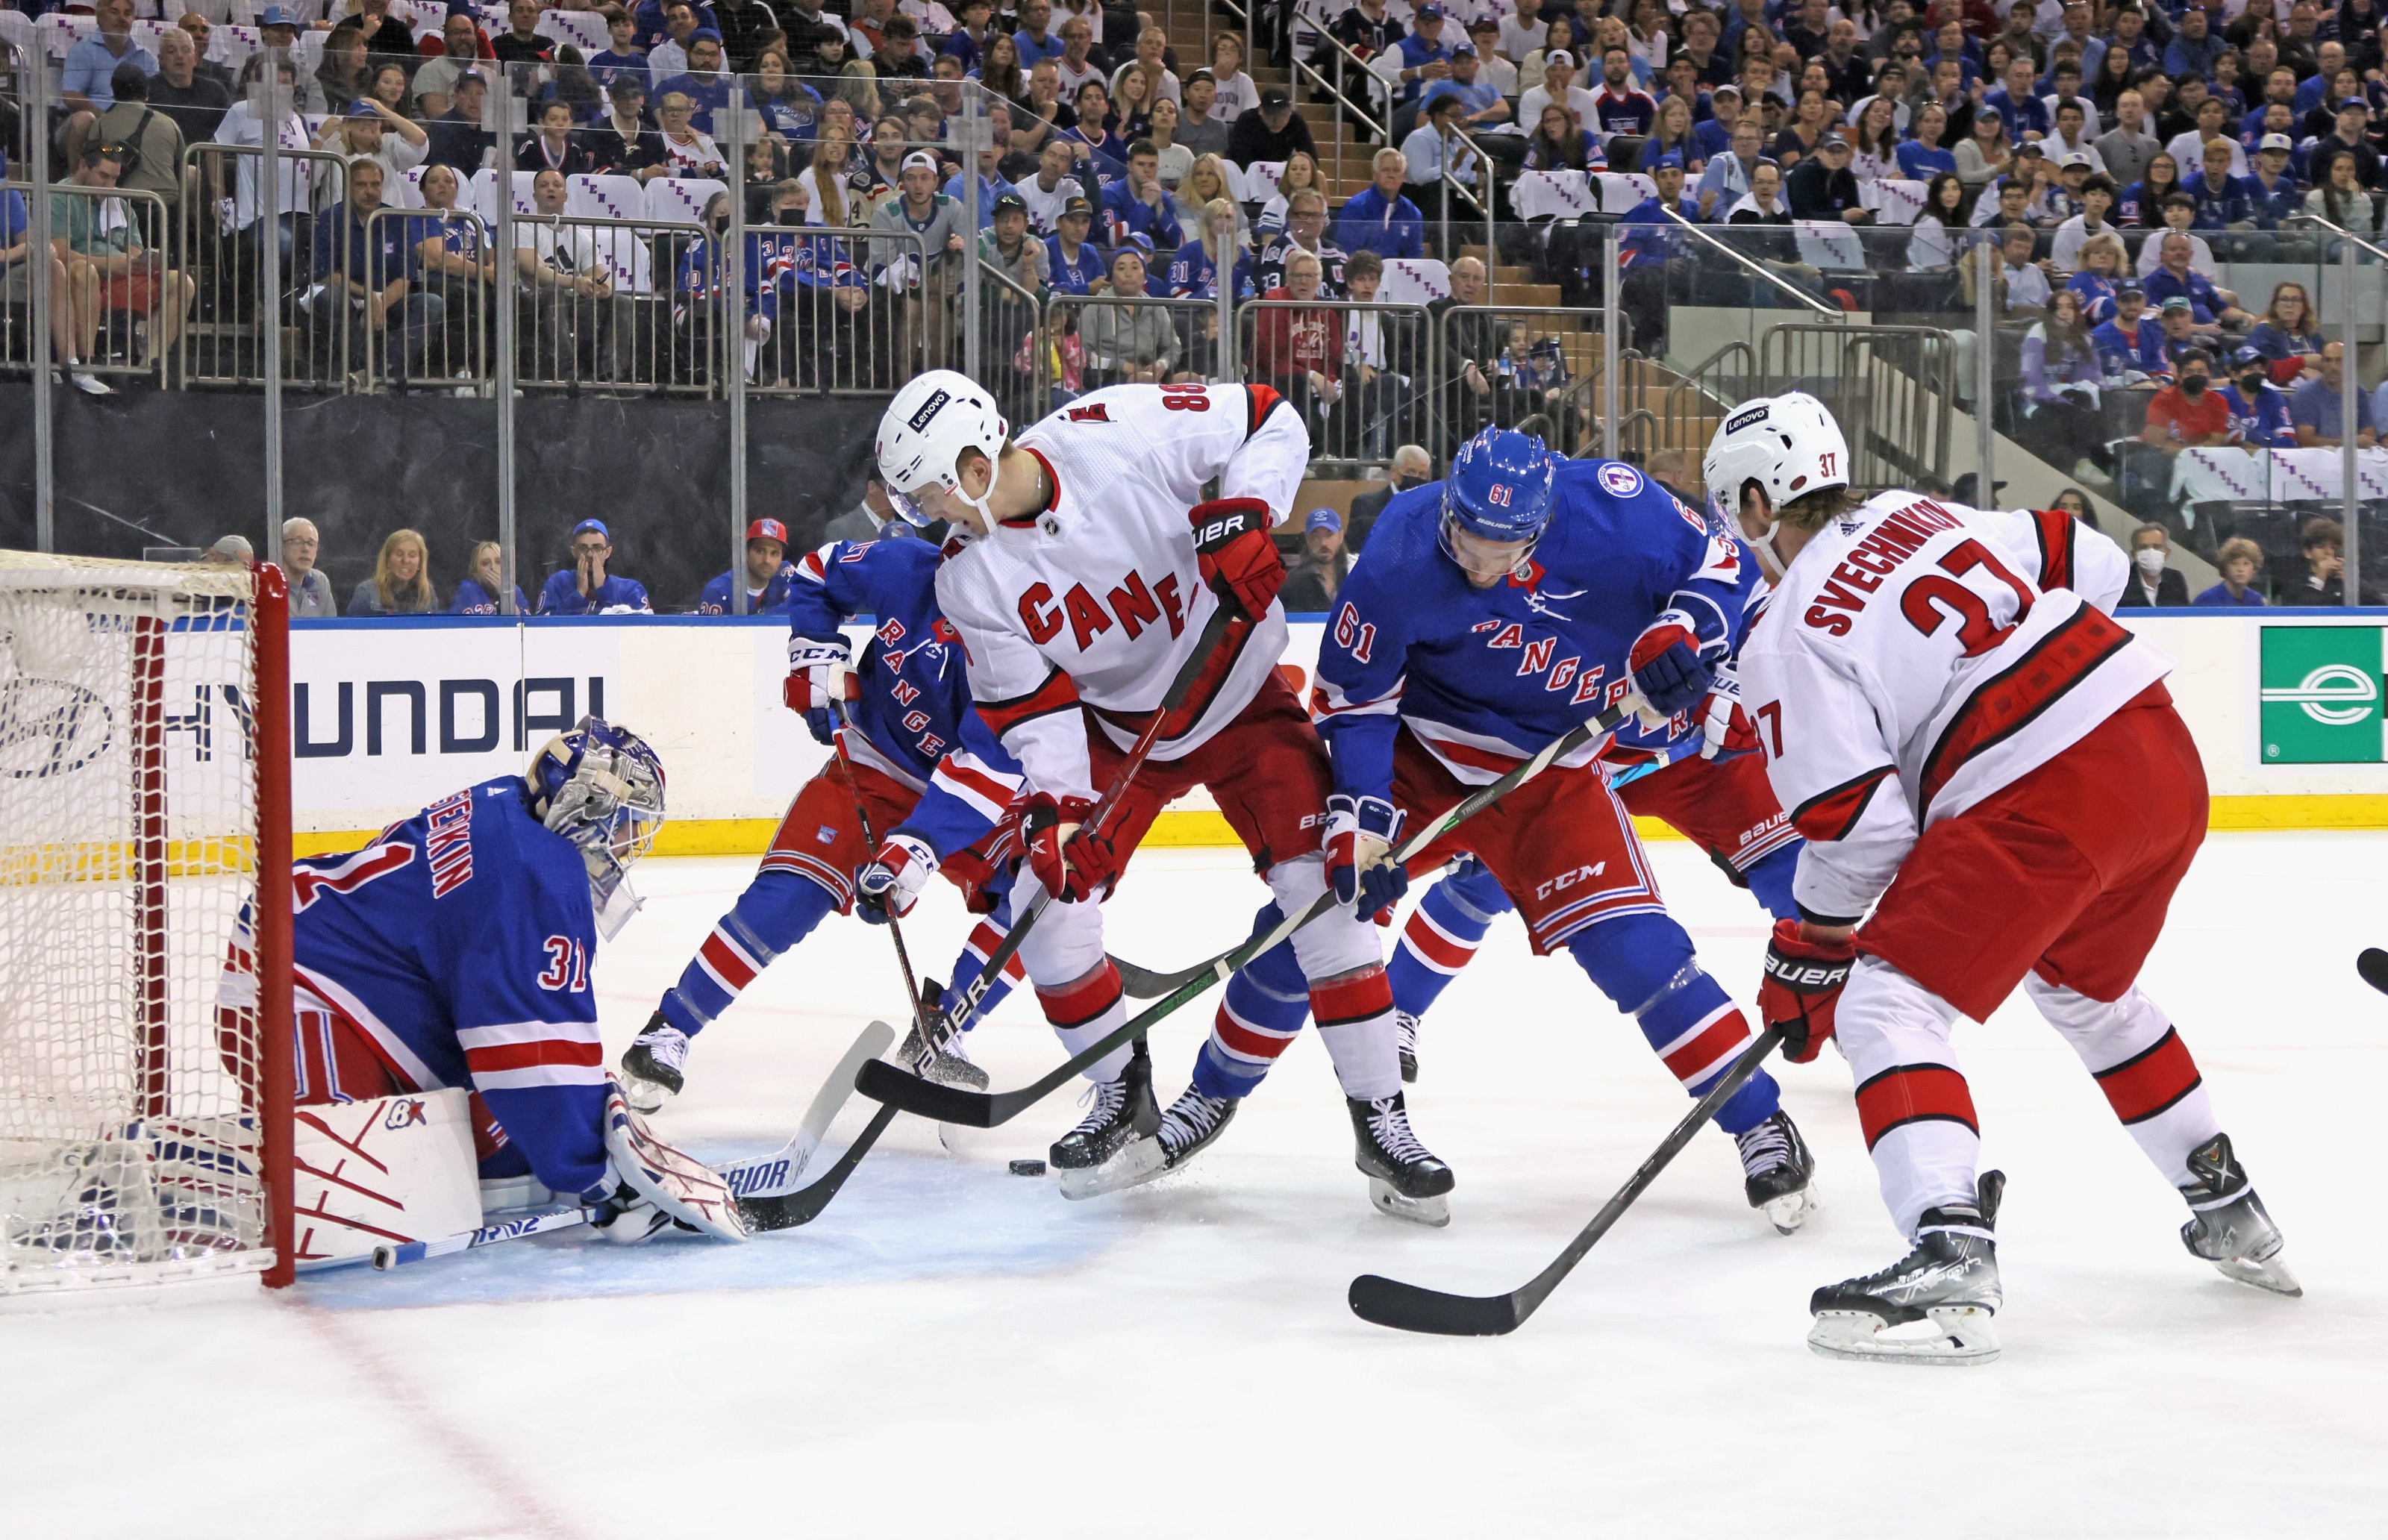 Devils beat Capitals in OT, will face Rangers in 1st round - The